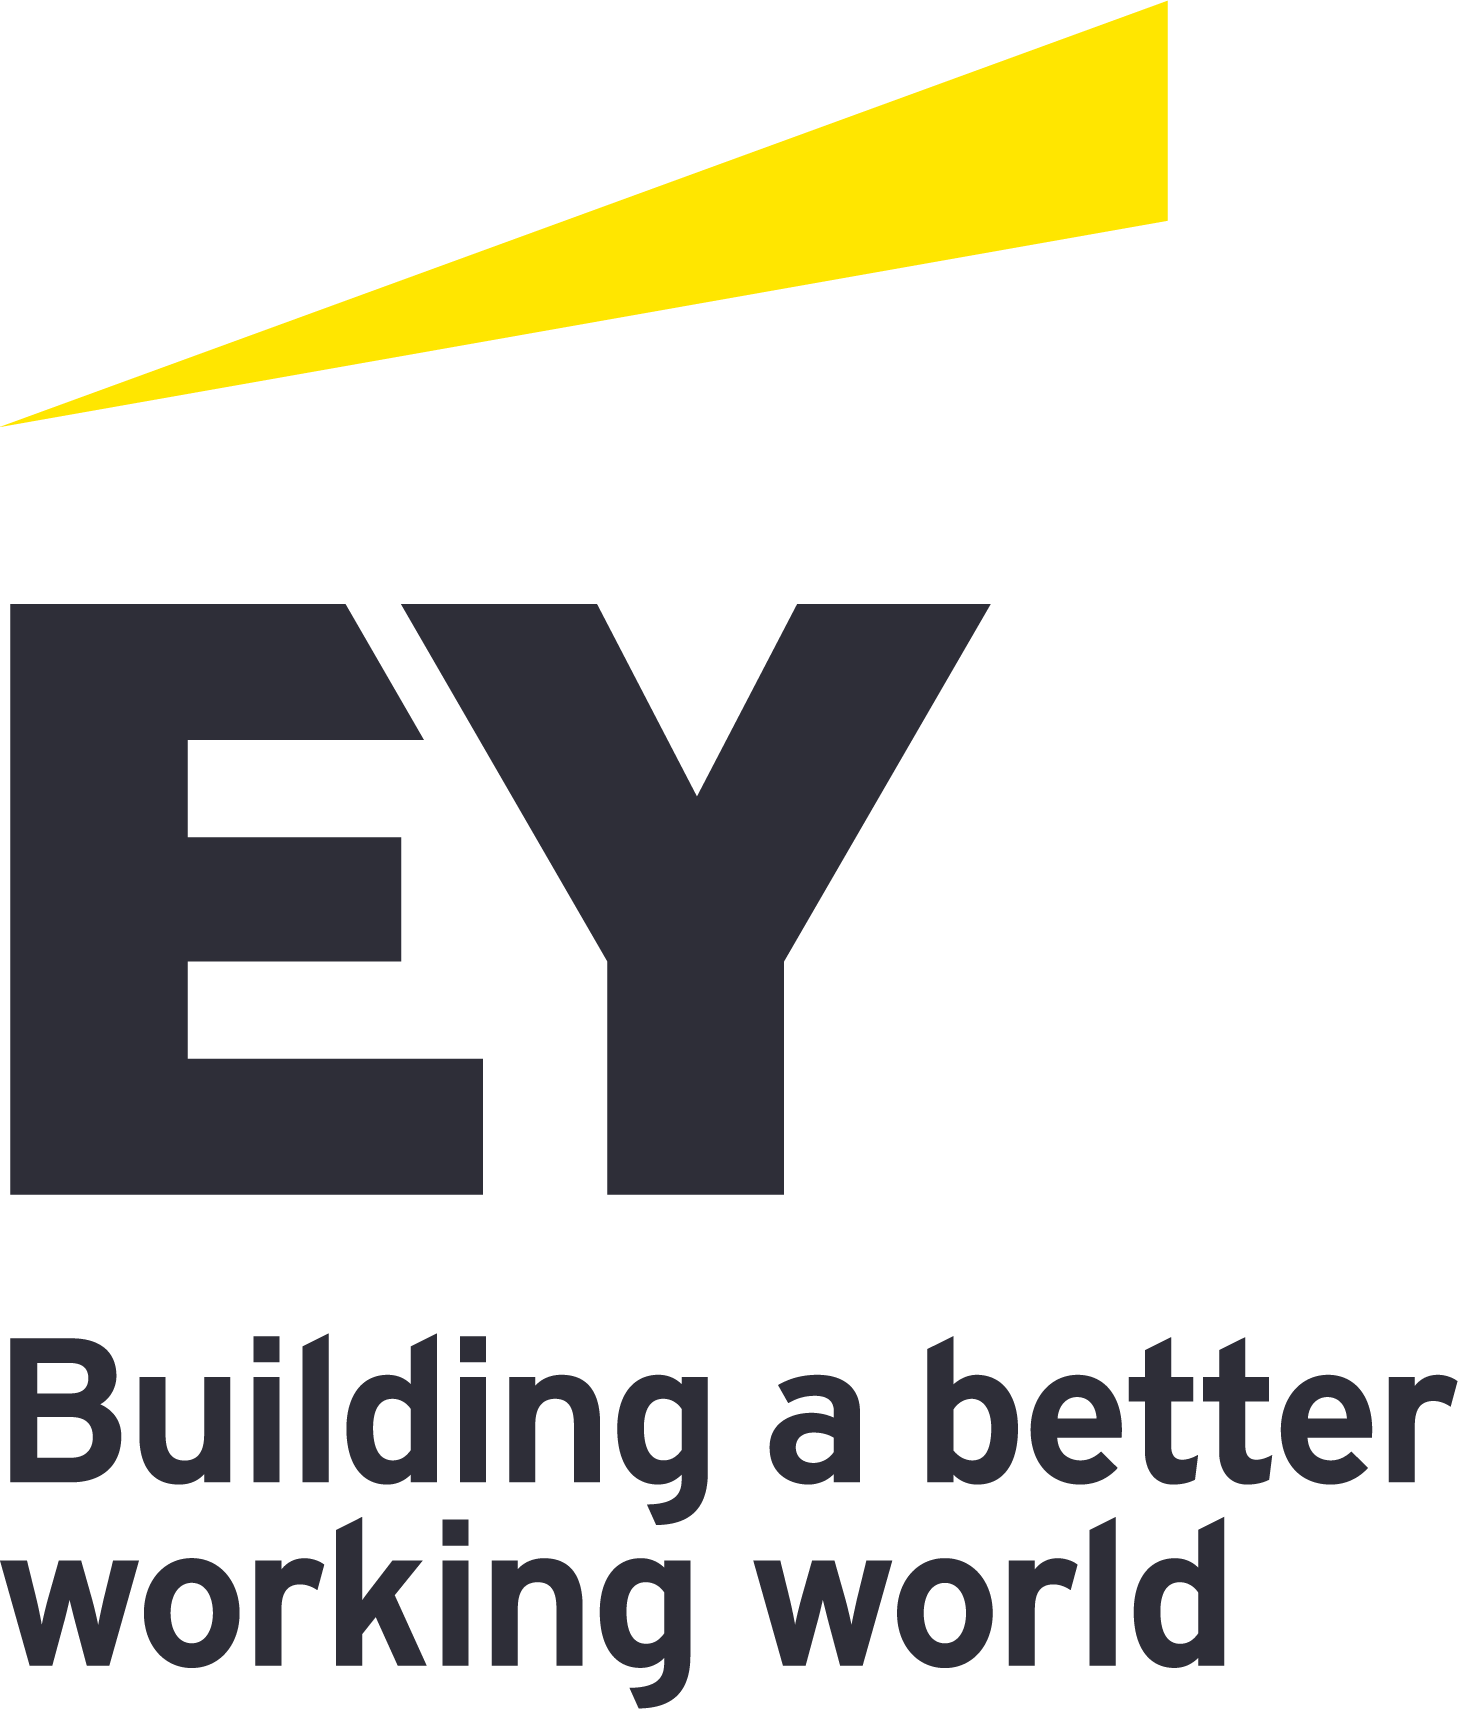 Ernst & Young. Building a better working world.